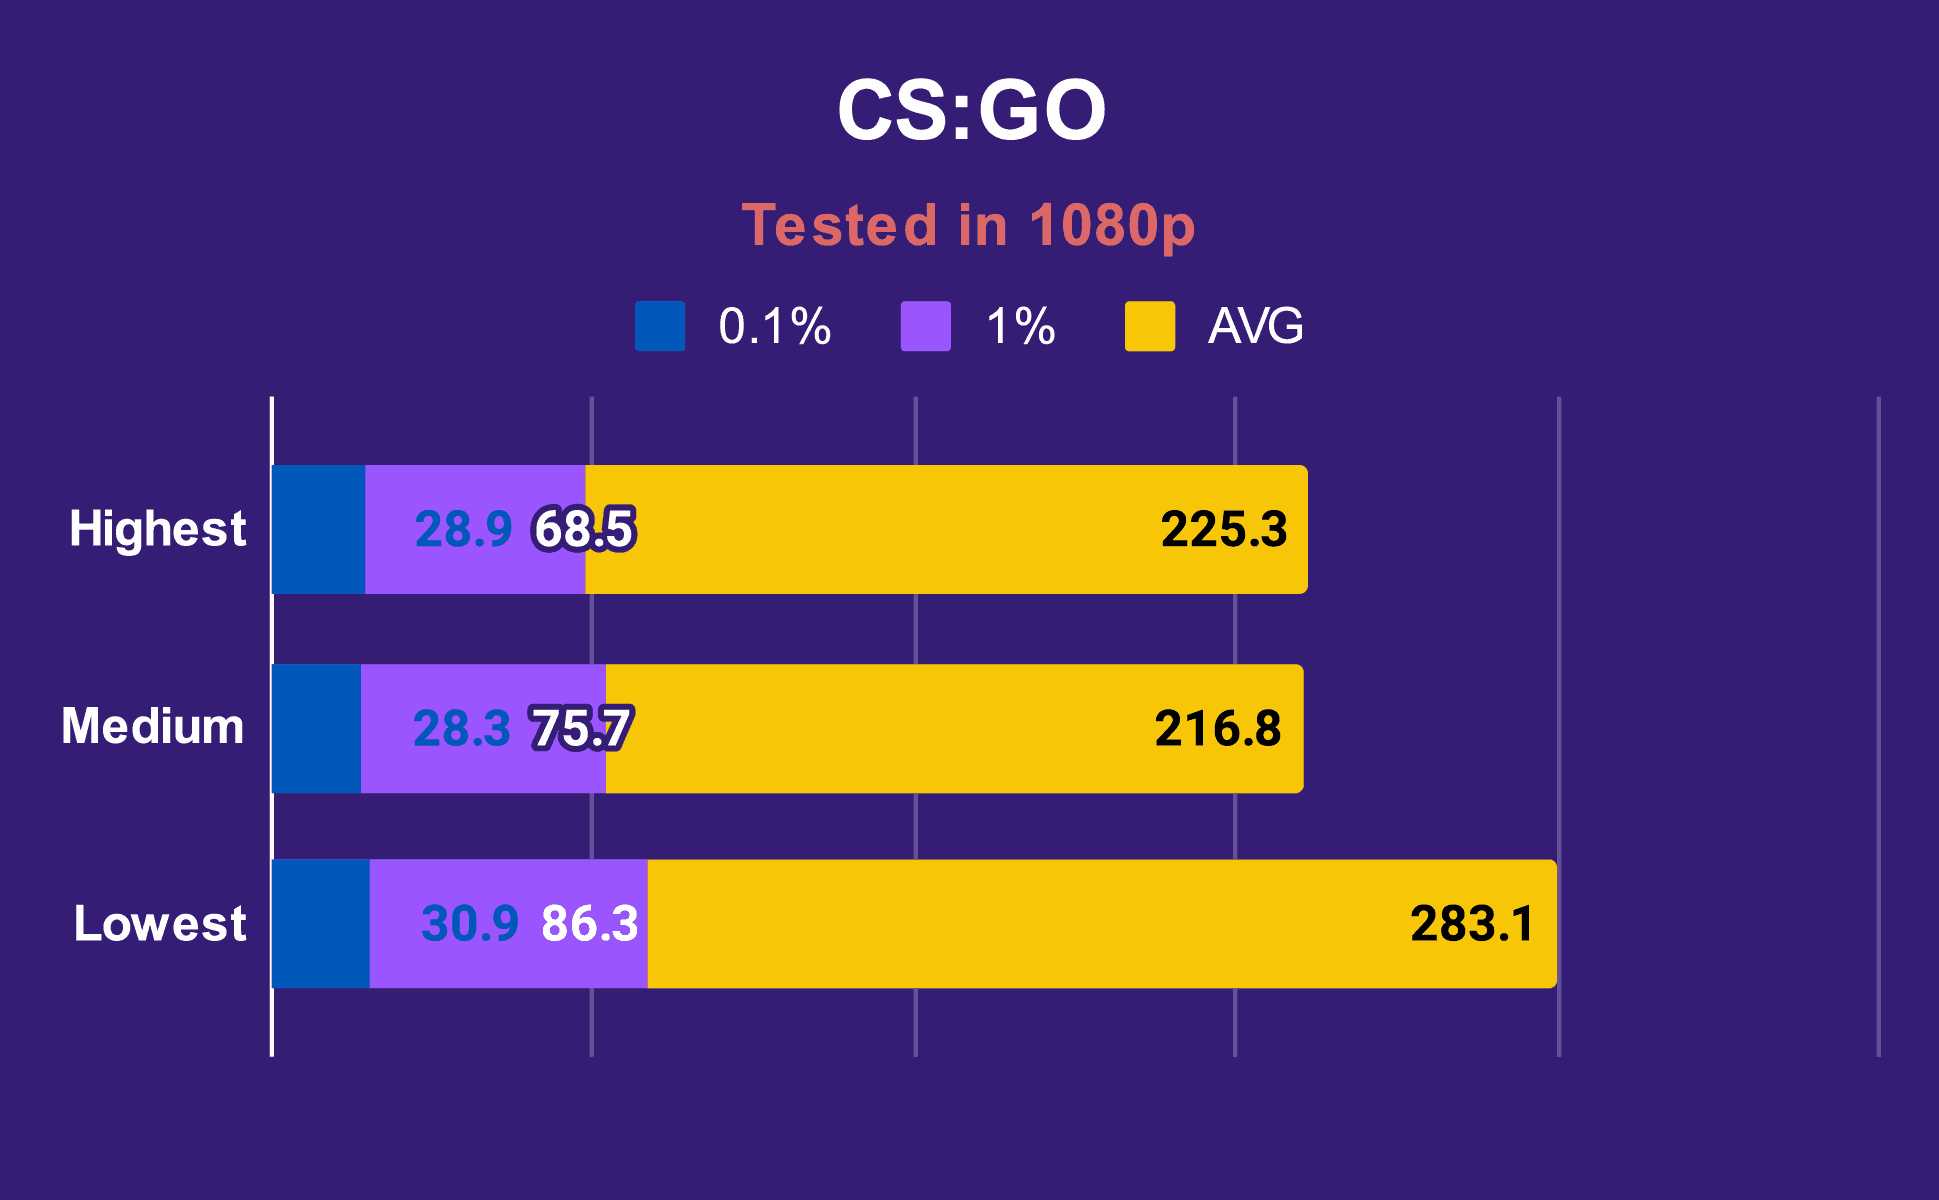 ASUS ROG FLOW X16 BENCHMARK CSGO TESTED IN 1080P